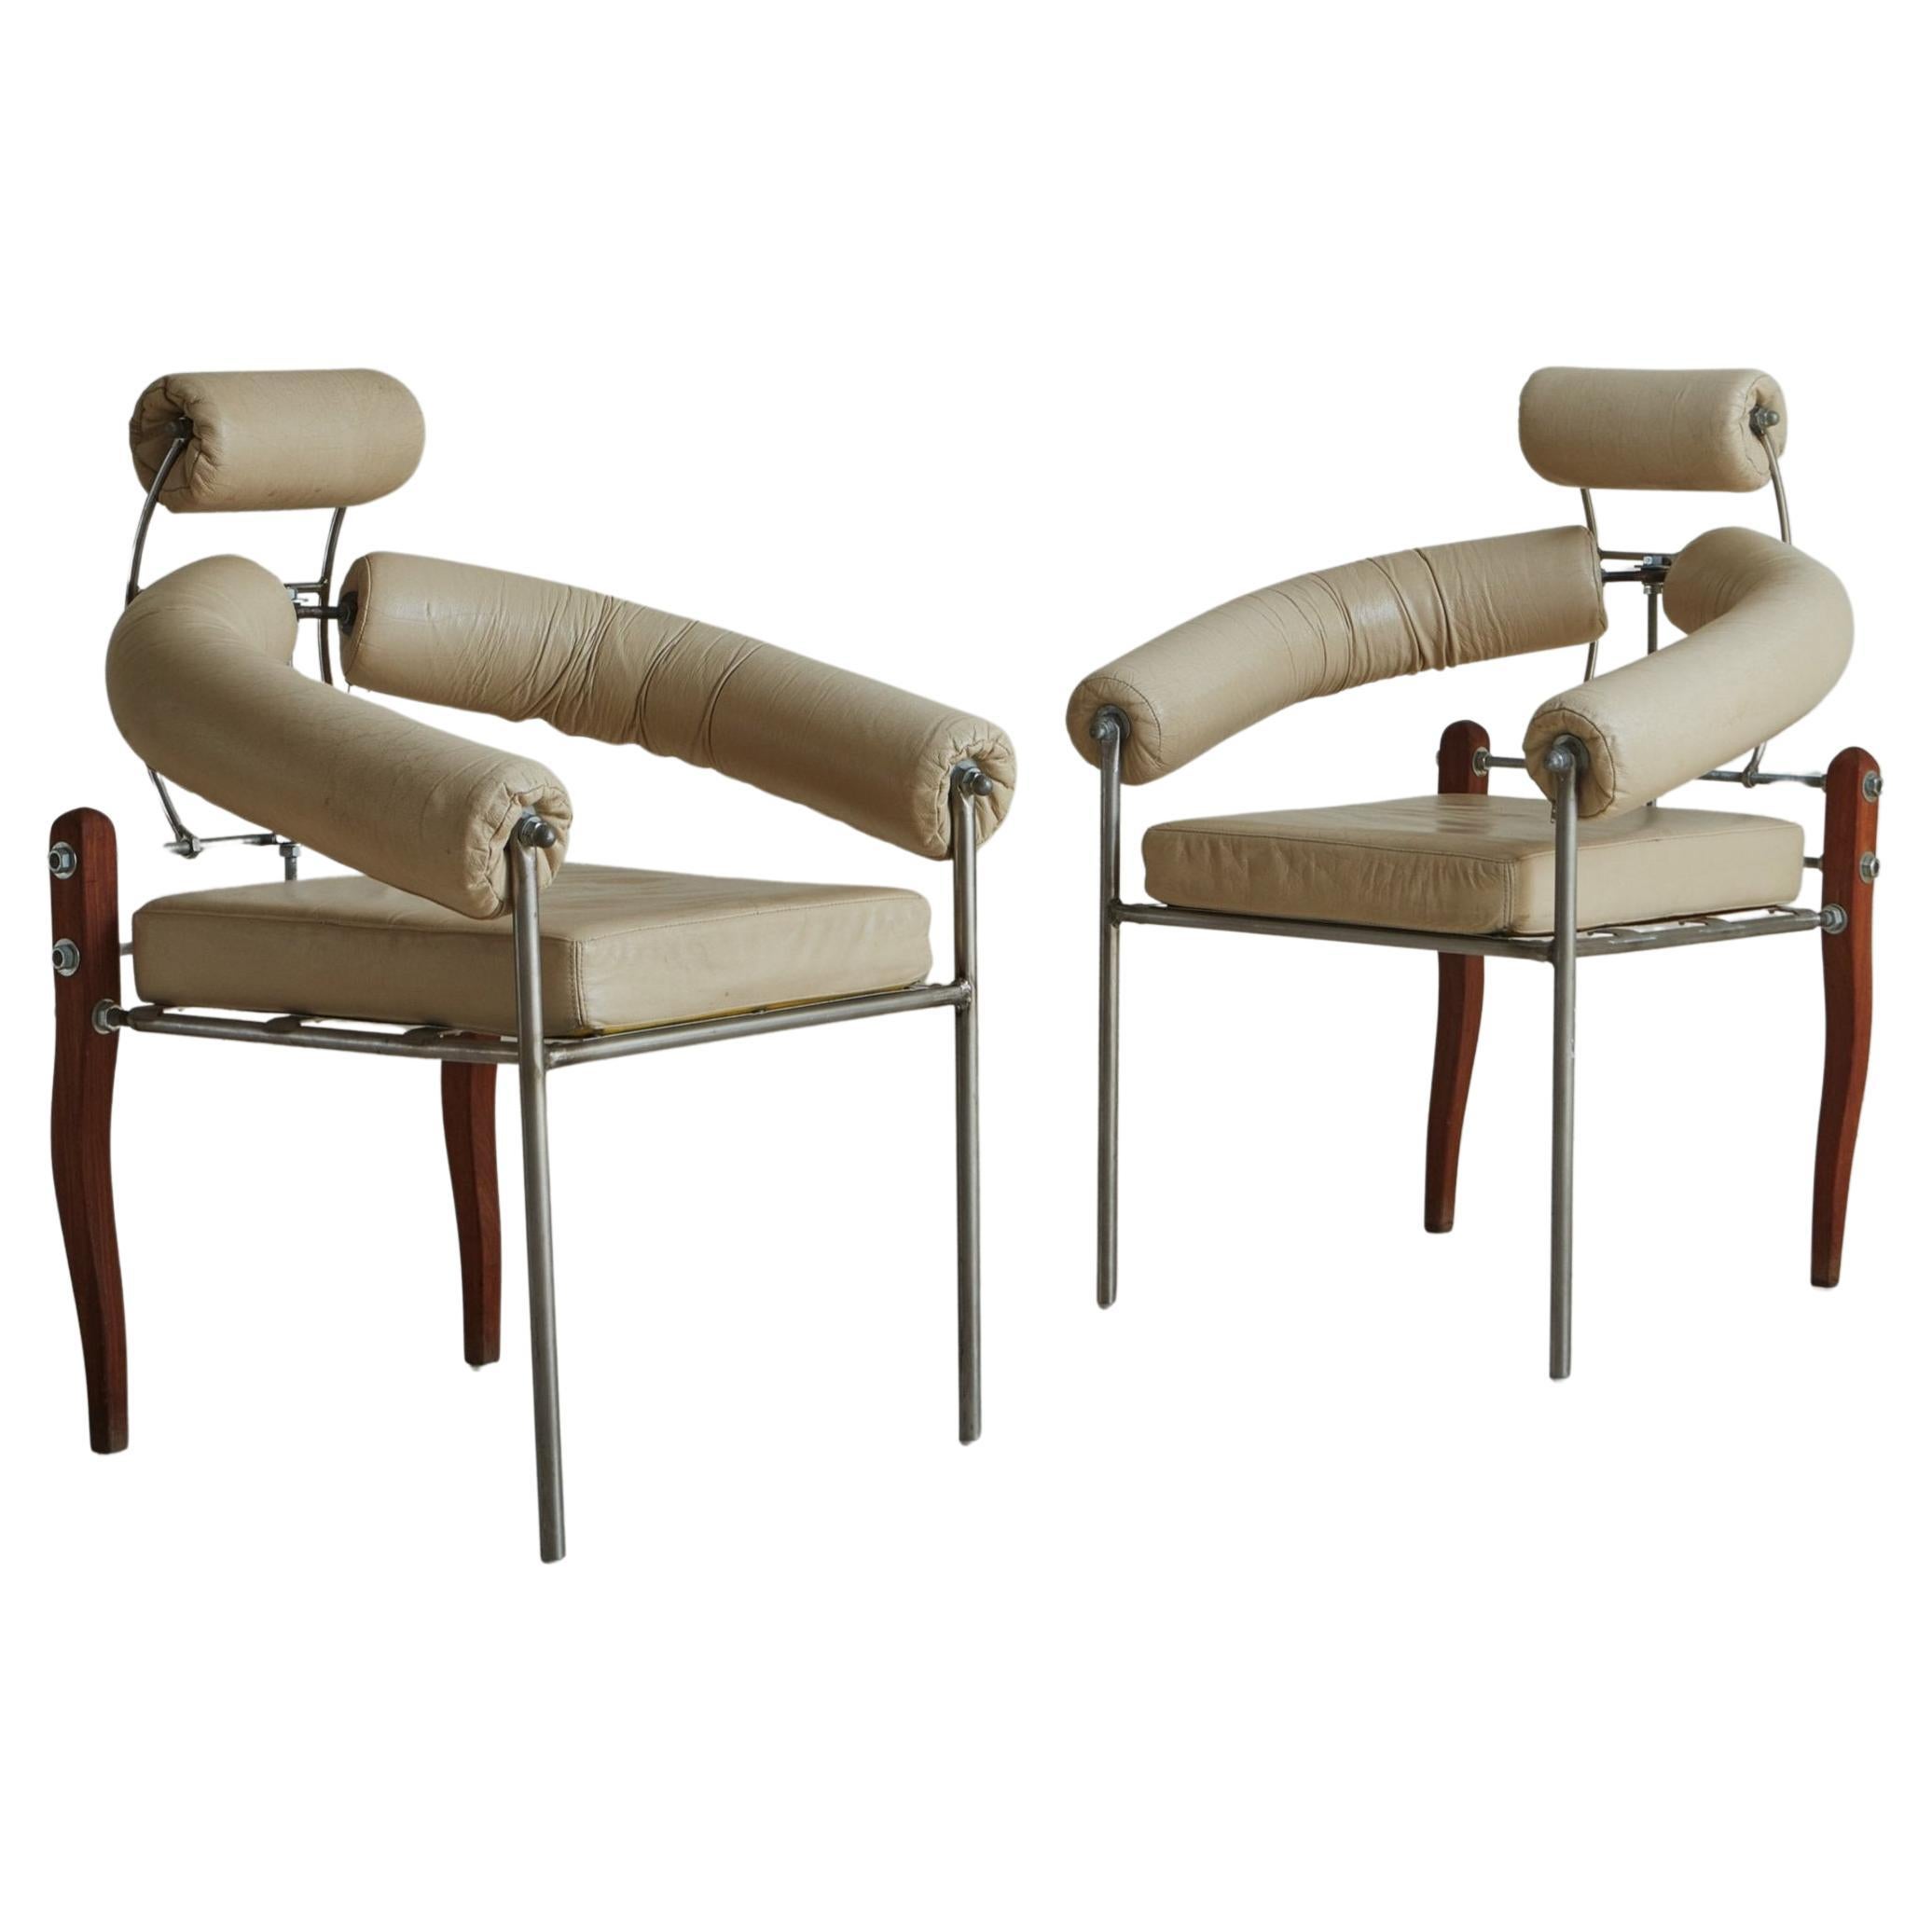 Pair of ‘Pirmin’ Chairs in Cream Leather by Heinz Julen, Switzerland 1990s For Sale